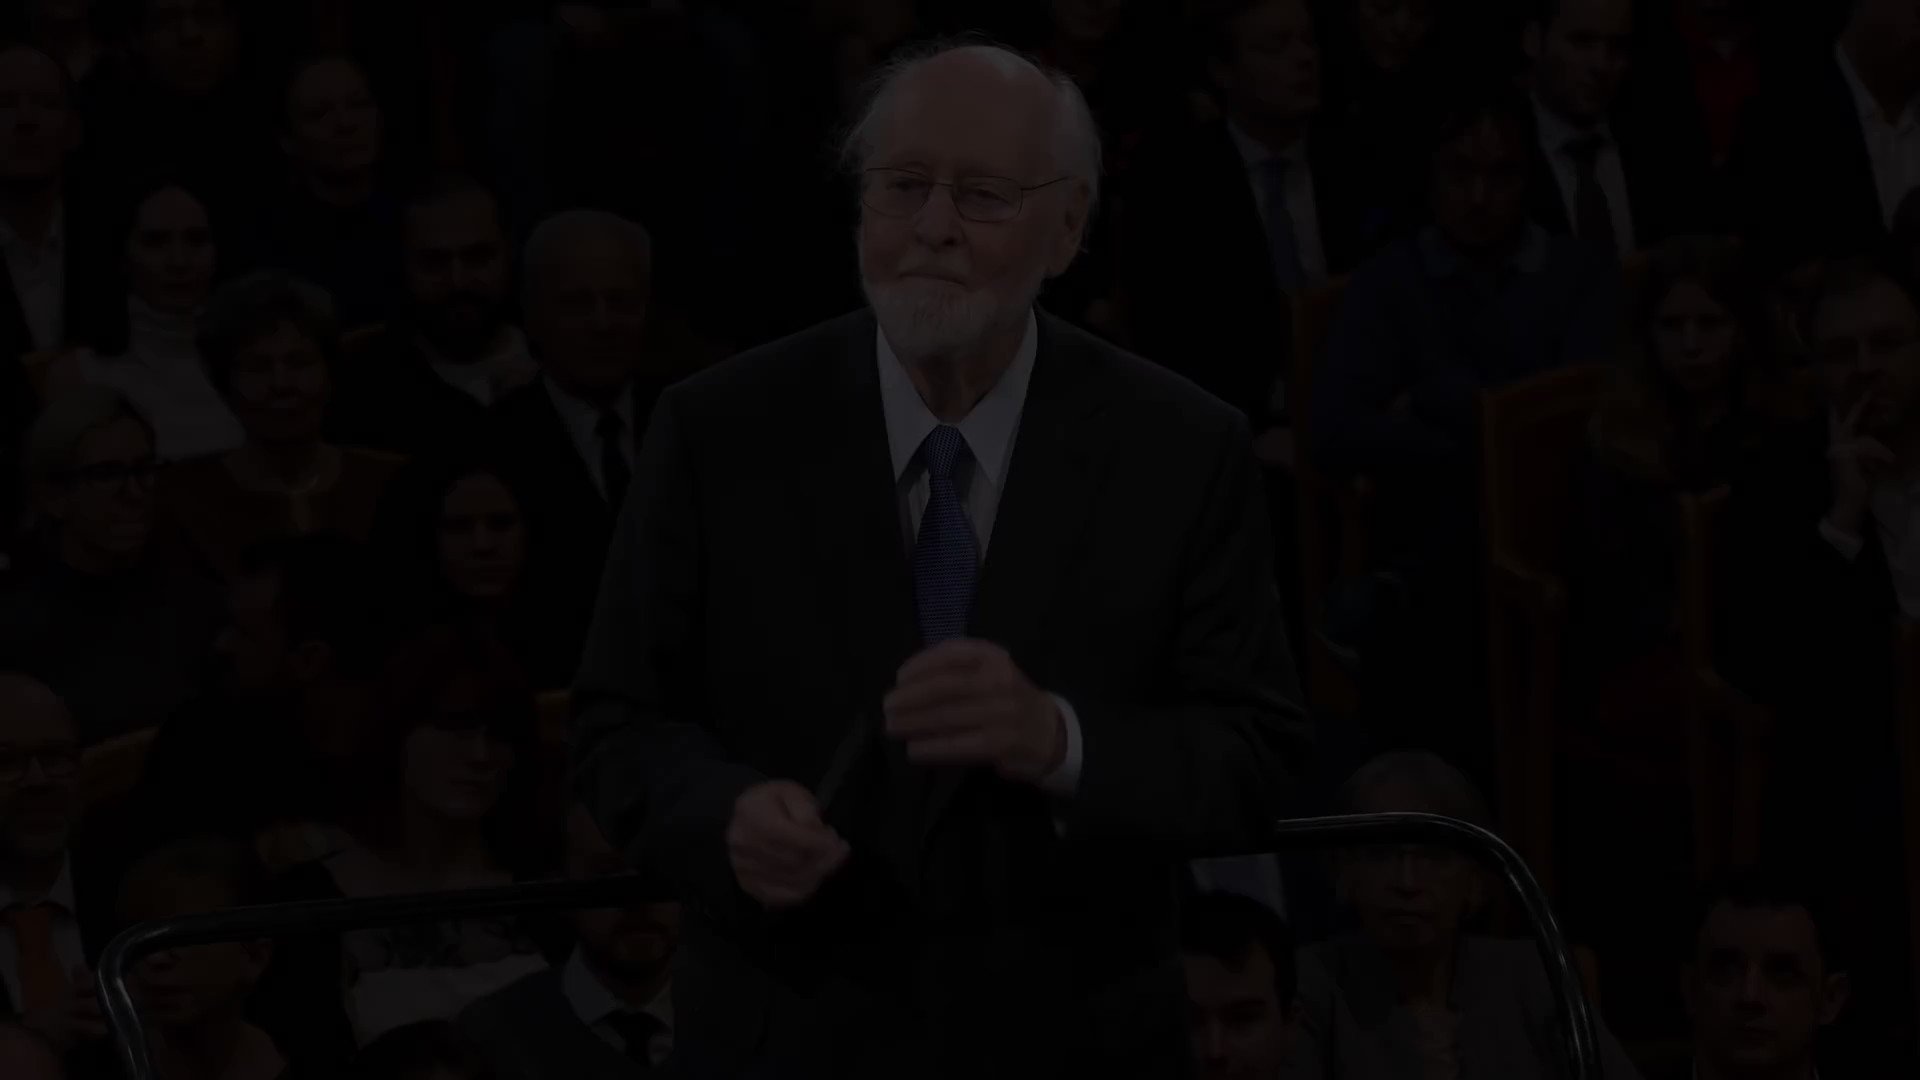 Happy 90th birthday to the legend John Williams. Here s an absolute banger (and his best work imo) to celebrate 